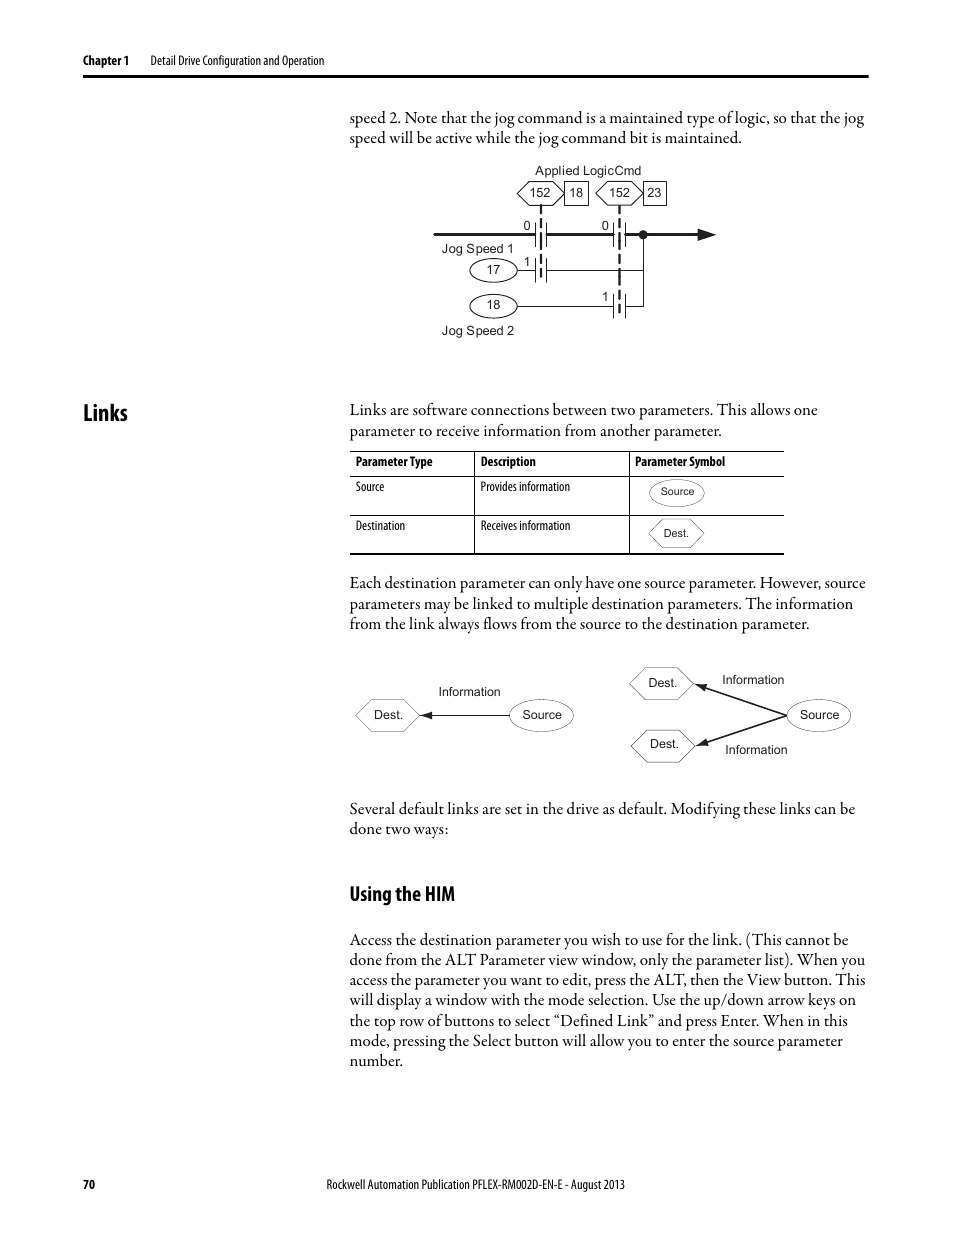 Links, Using the him | Rockwell Automation 20D PowerFlex 700S with Phase I Control Reference Manual User Manual | Page 70 / 190